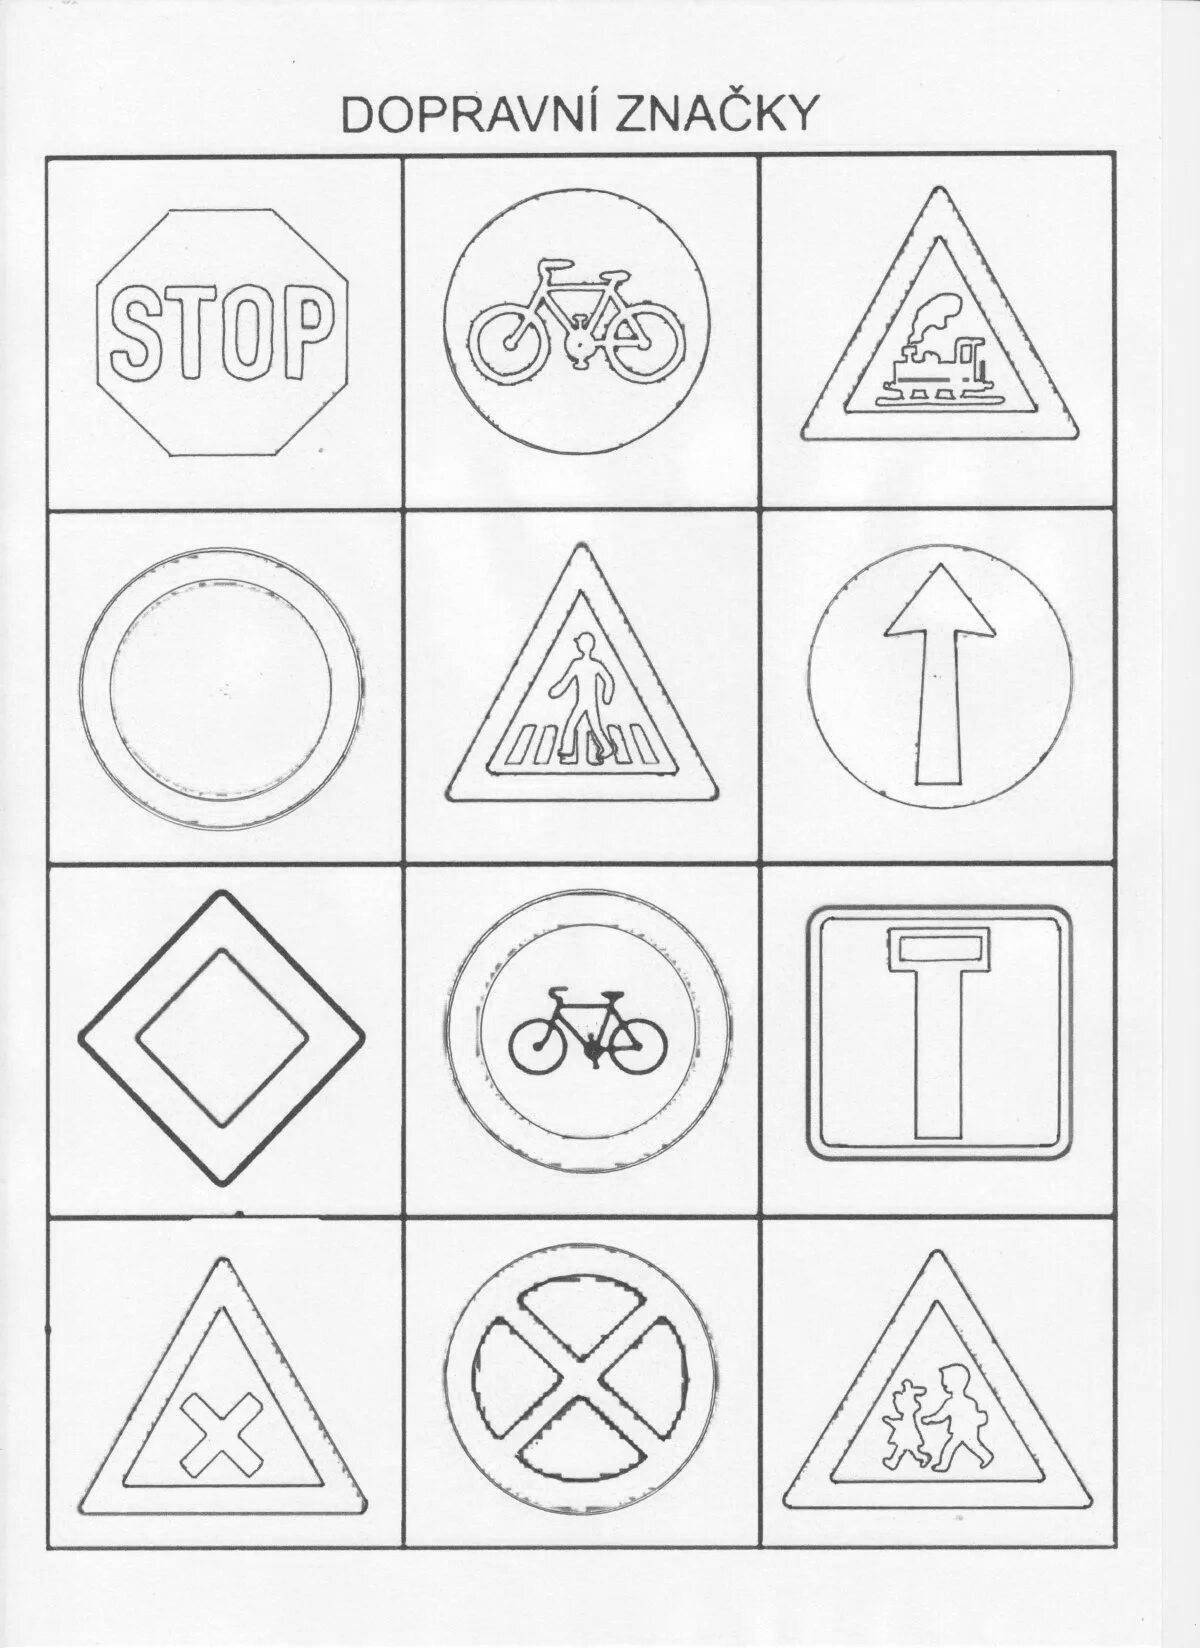 Coloring for bright road signs for kids